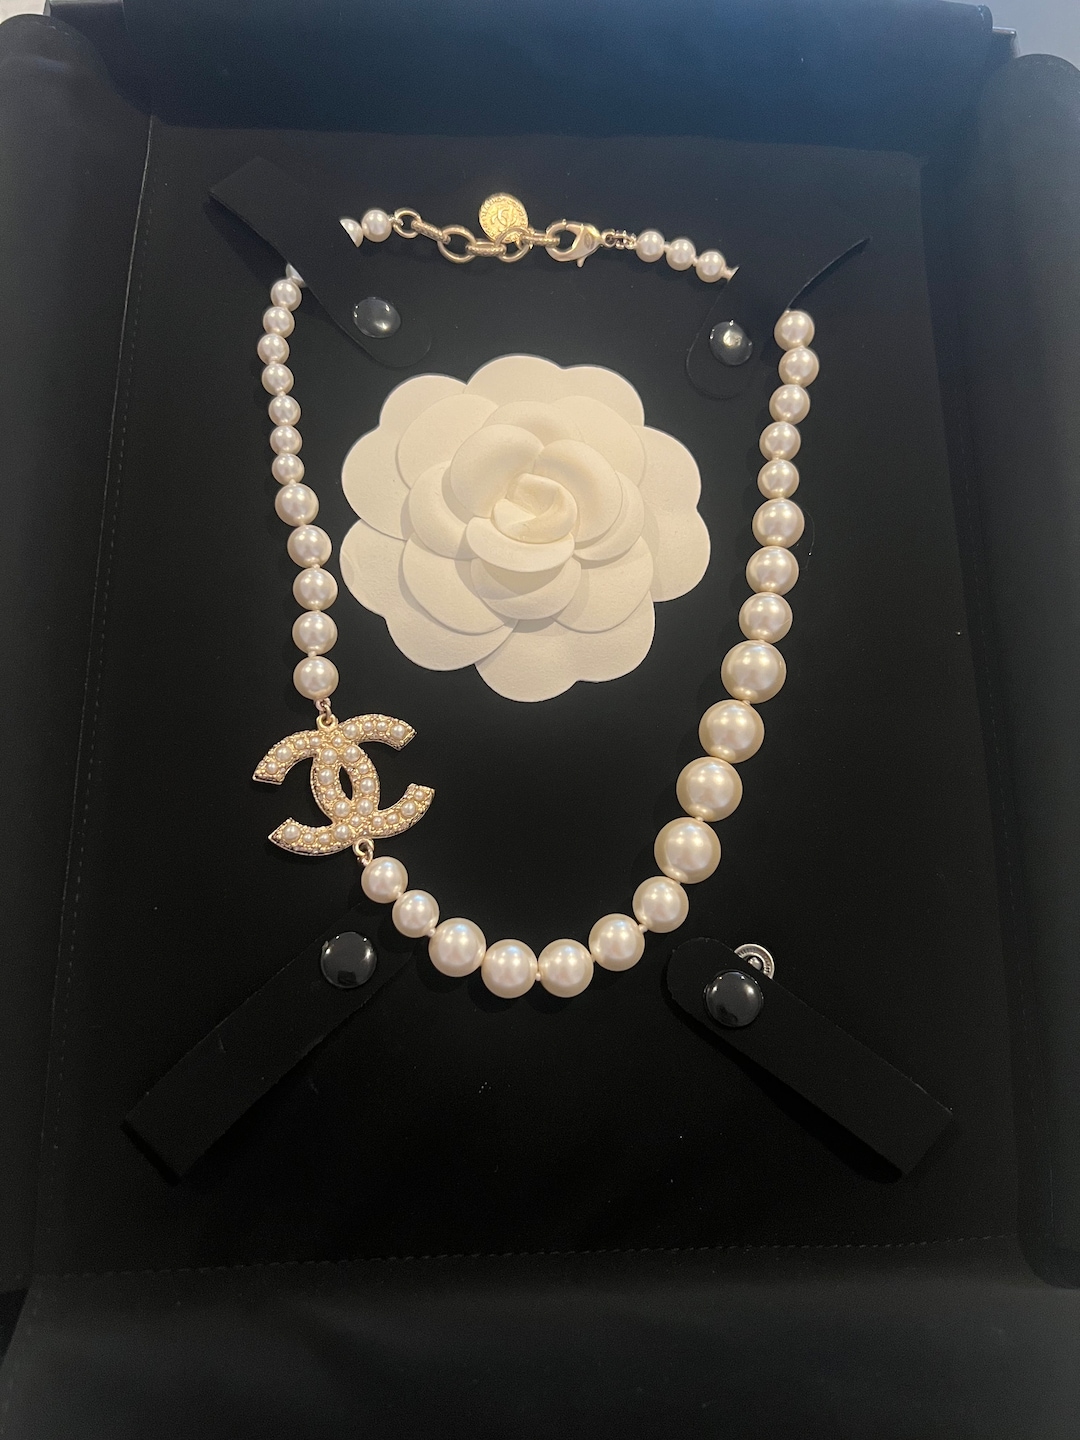 An Authentic Long Chanel Pearl Necklace CCs set with seed Pearls